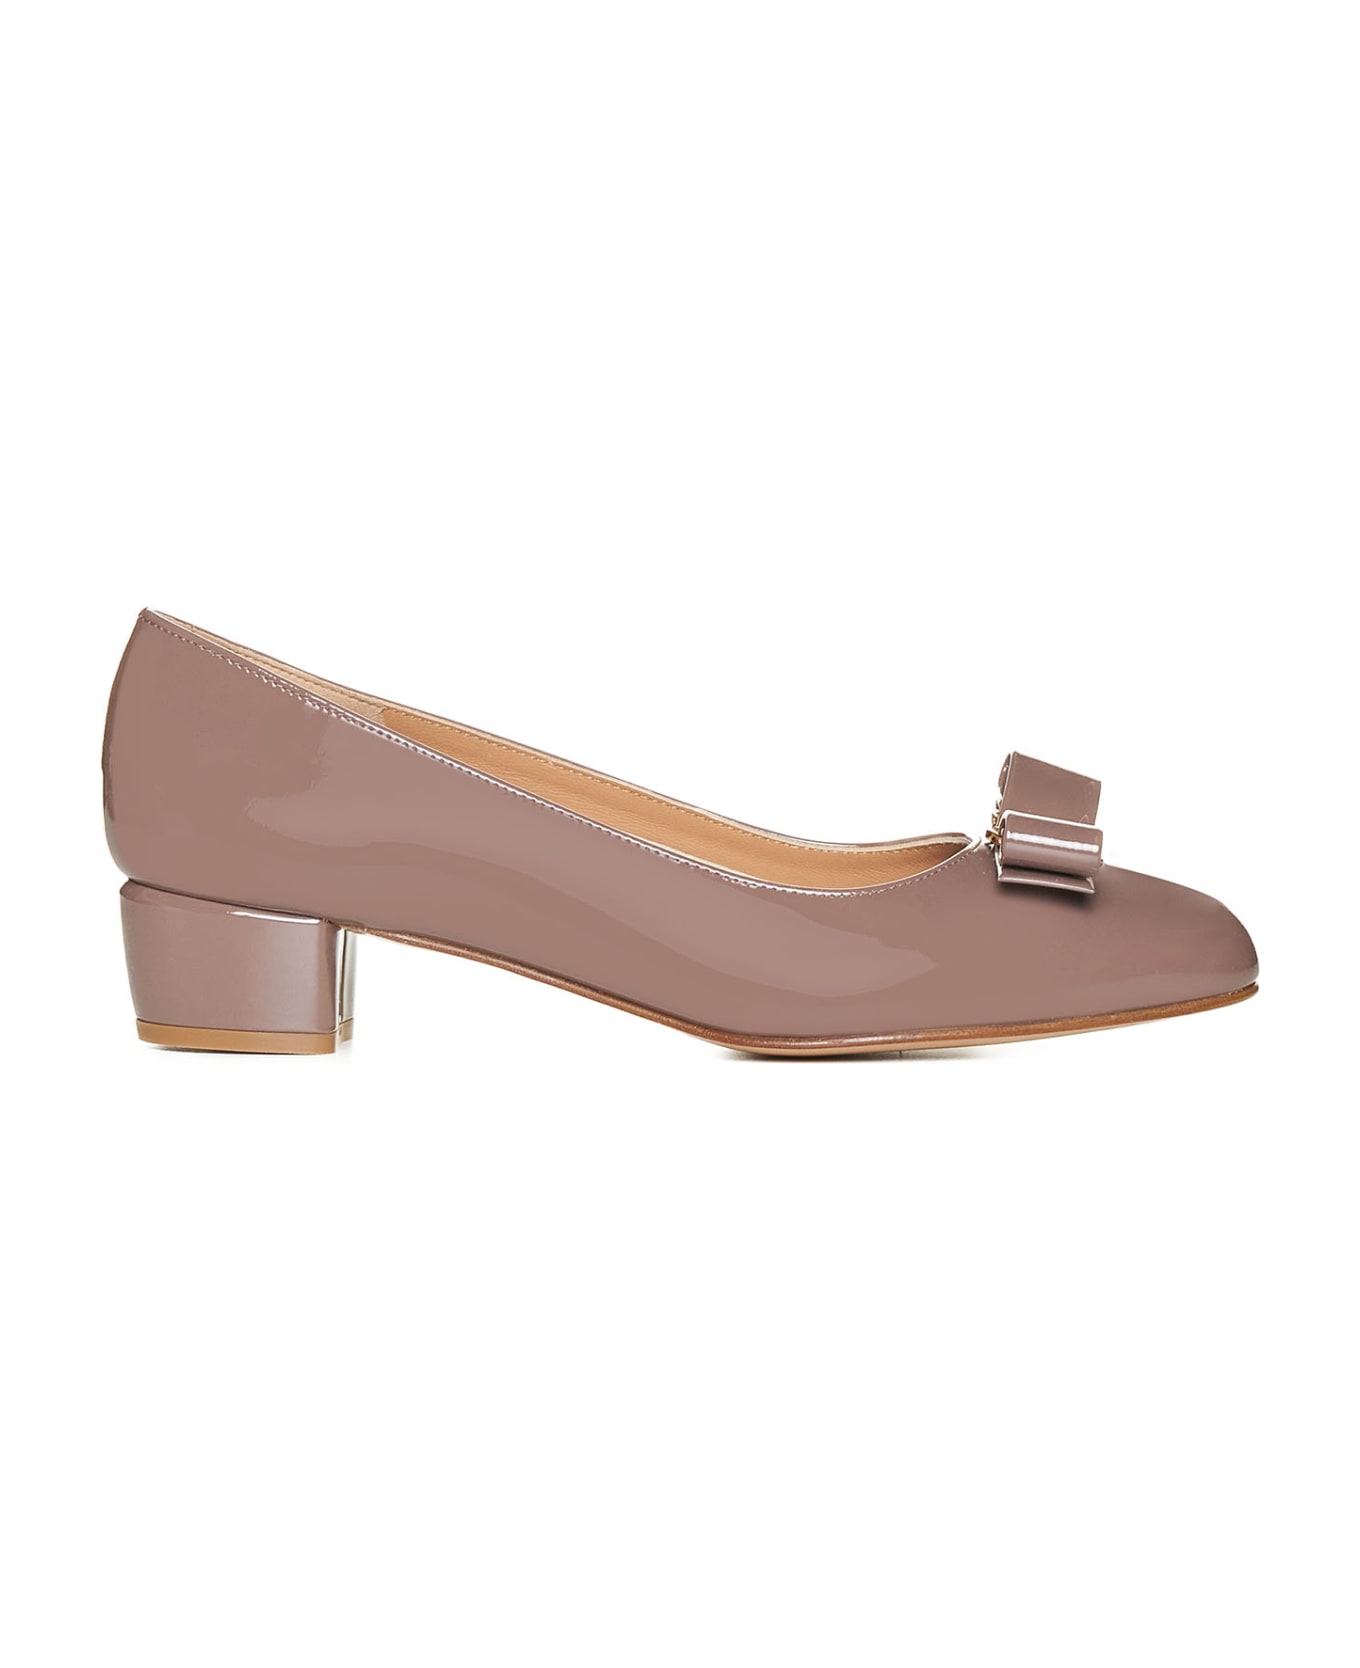 Ferragamo Bow-detailed Slip-on Pumps - Caraway seed